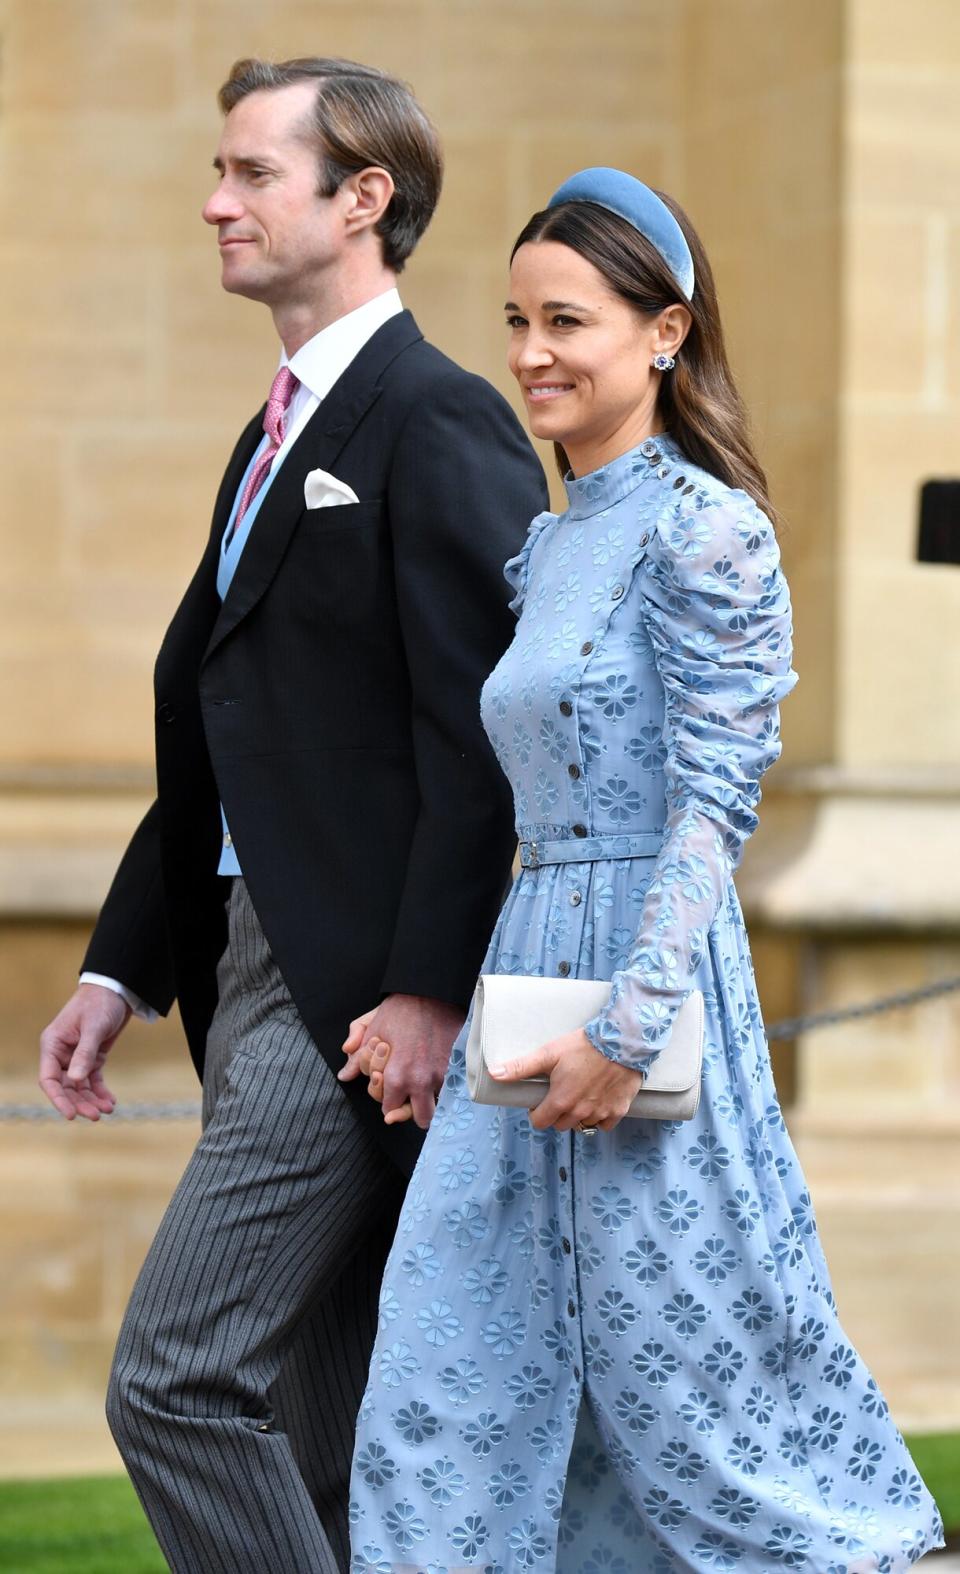 James Matthews and Pippa Middleton attend the wedding of Lady Gabriella Windsor and Thomas Kingston at St George's Chapel on May 18, 2019 in Windsor, England